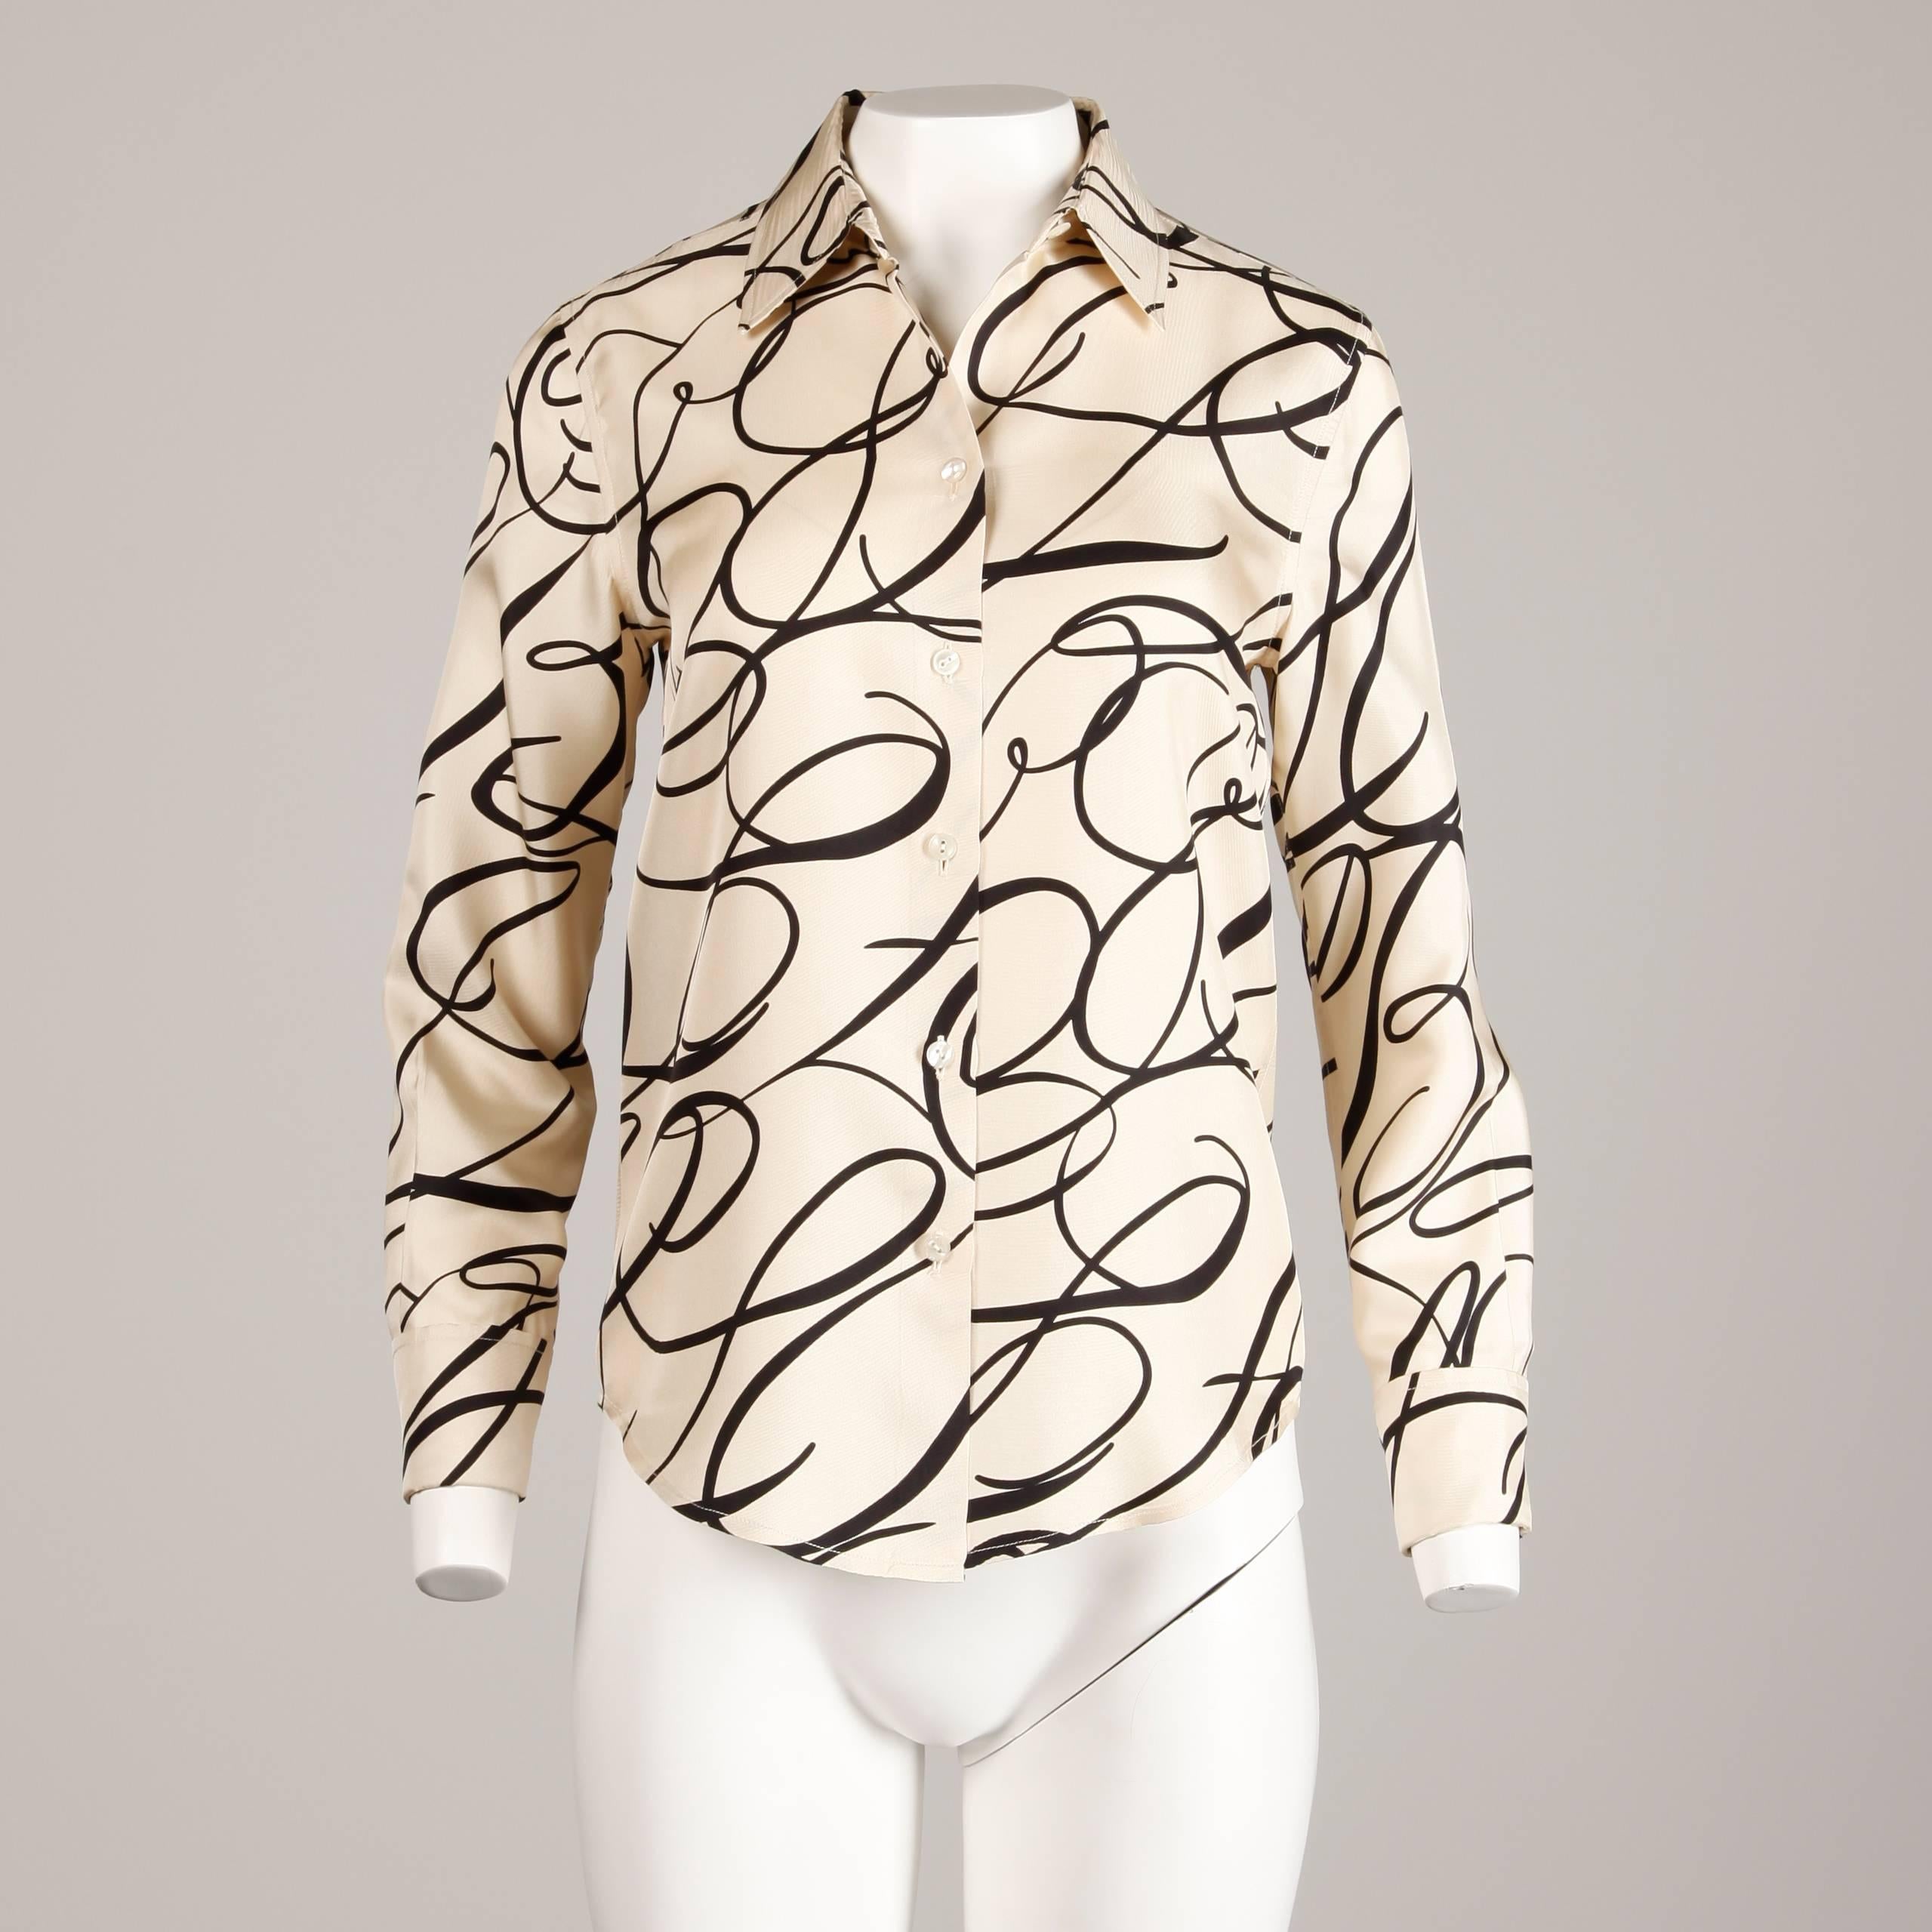 Gorgeous vintage silk blouse with a black scroll print attributed to Bill Blass (label is missing). Button up front and fold over sleeves that require cuff links (not included). Unlined. This blouse fits like a modern size small. The bust measures